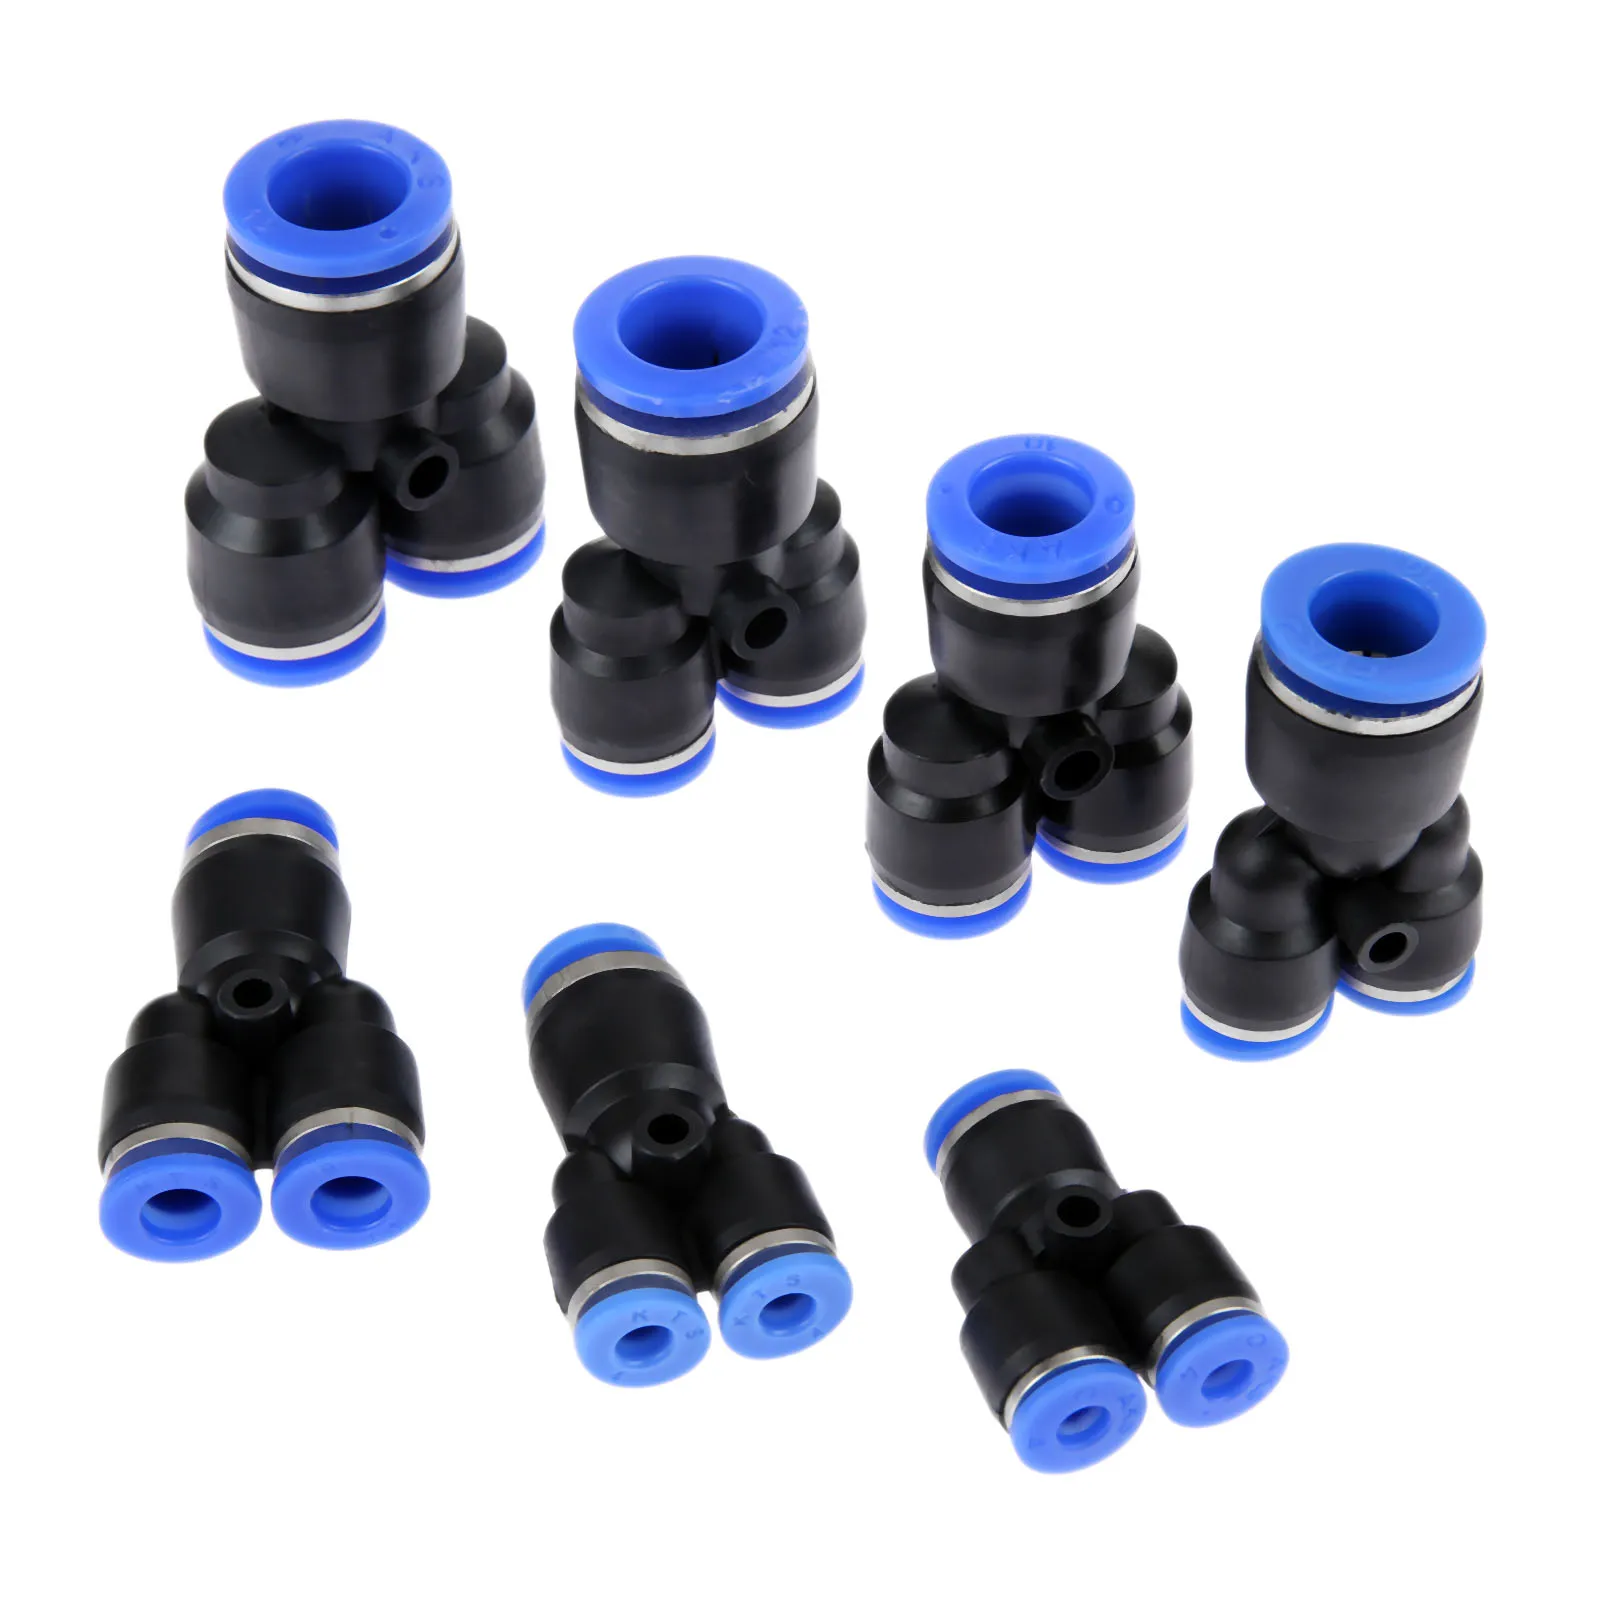 5 X Pneumatic Air Unequal Connector Push in Fitting Y Union Reducer 10mm-6mm OD 